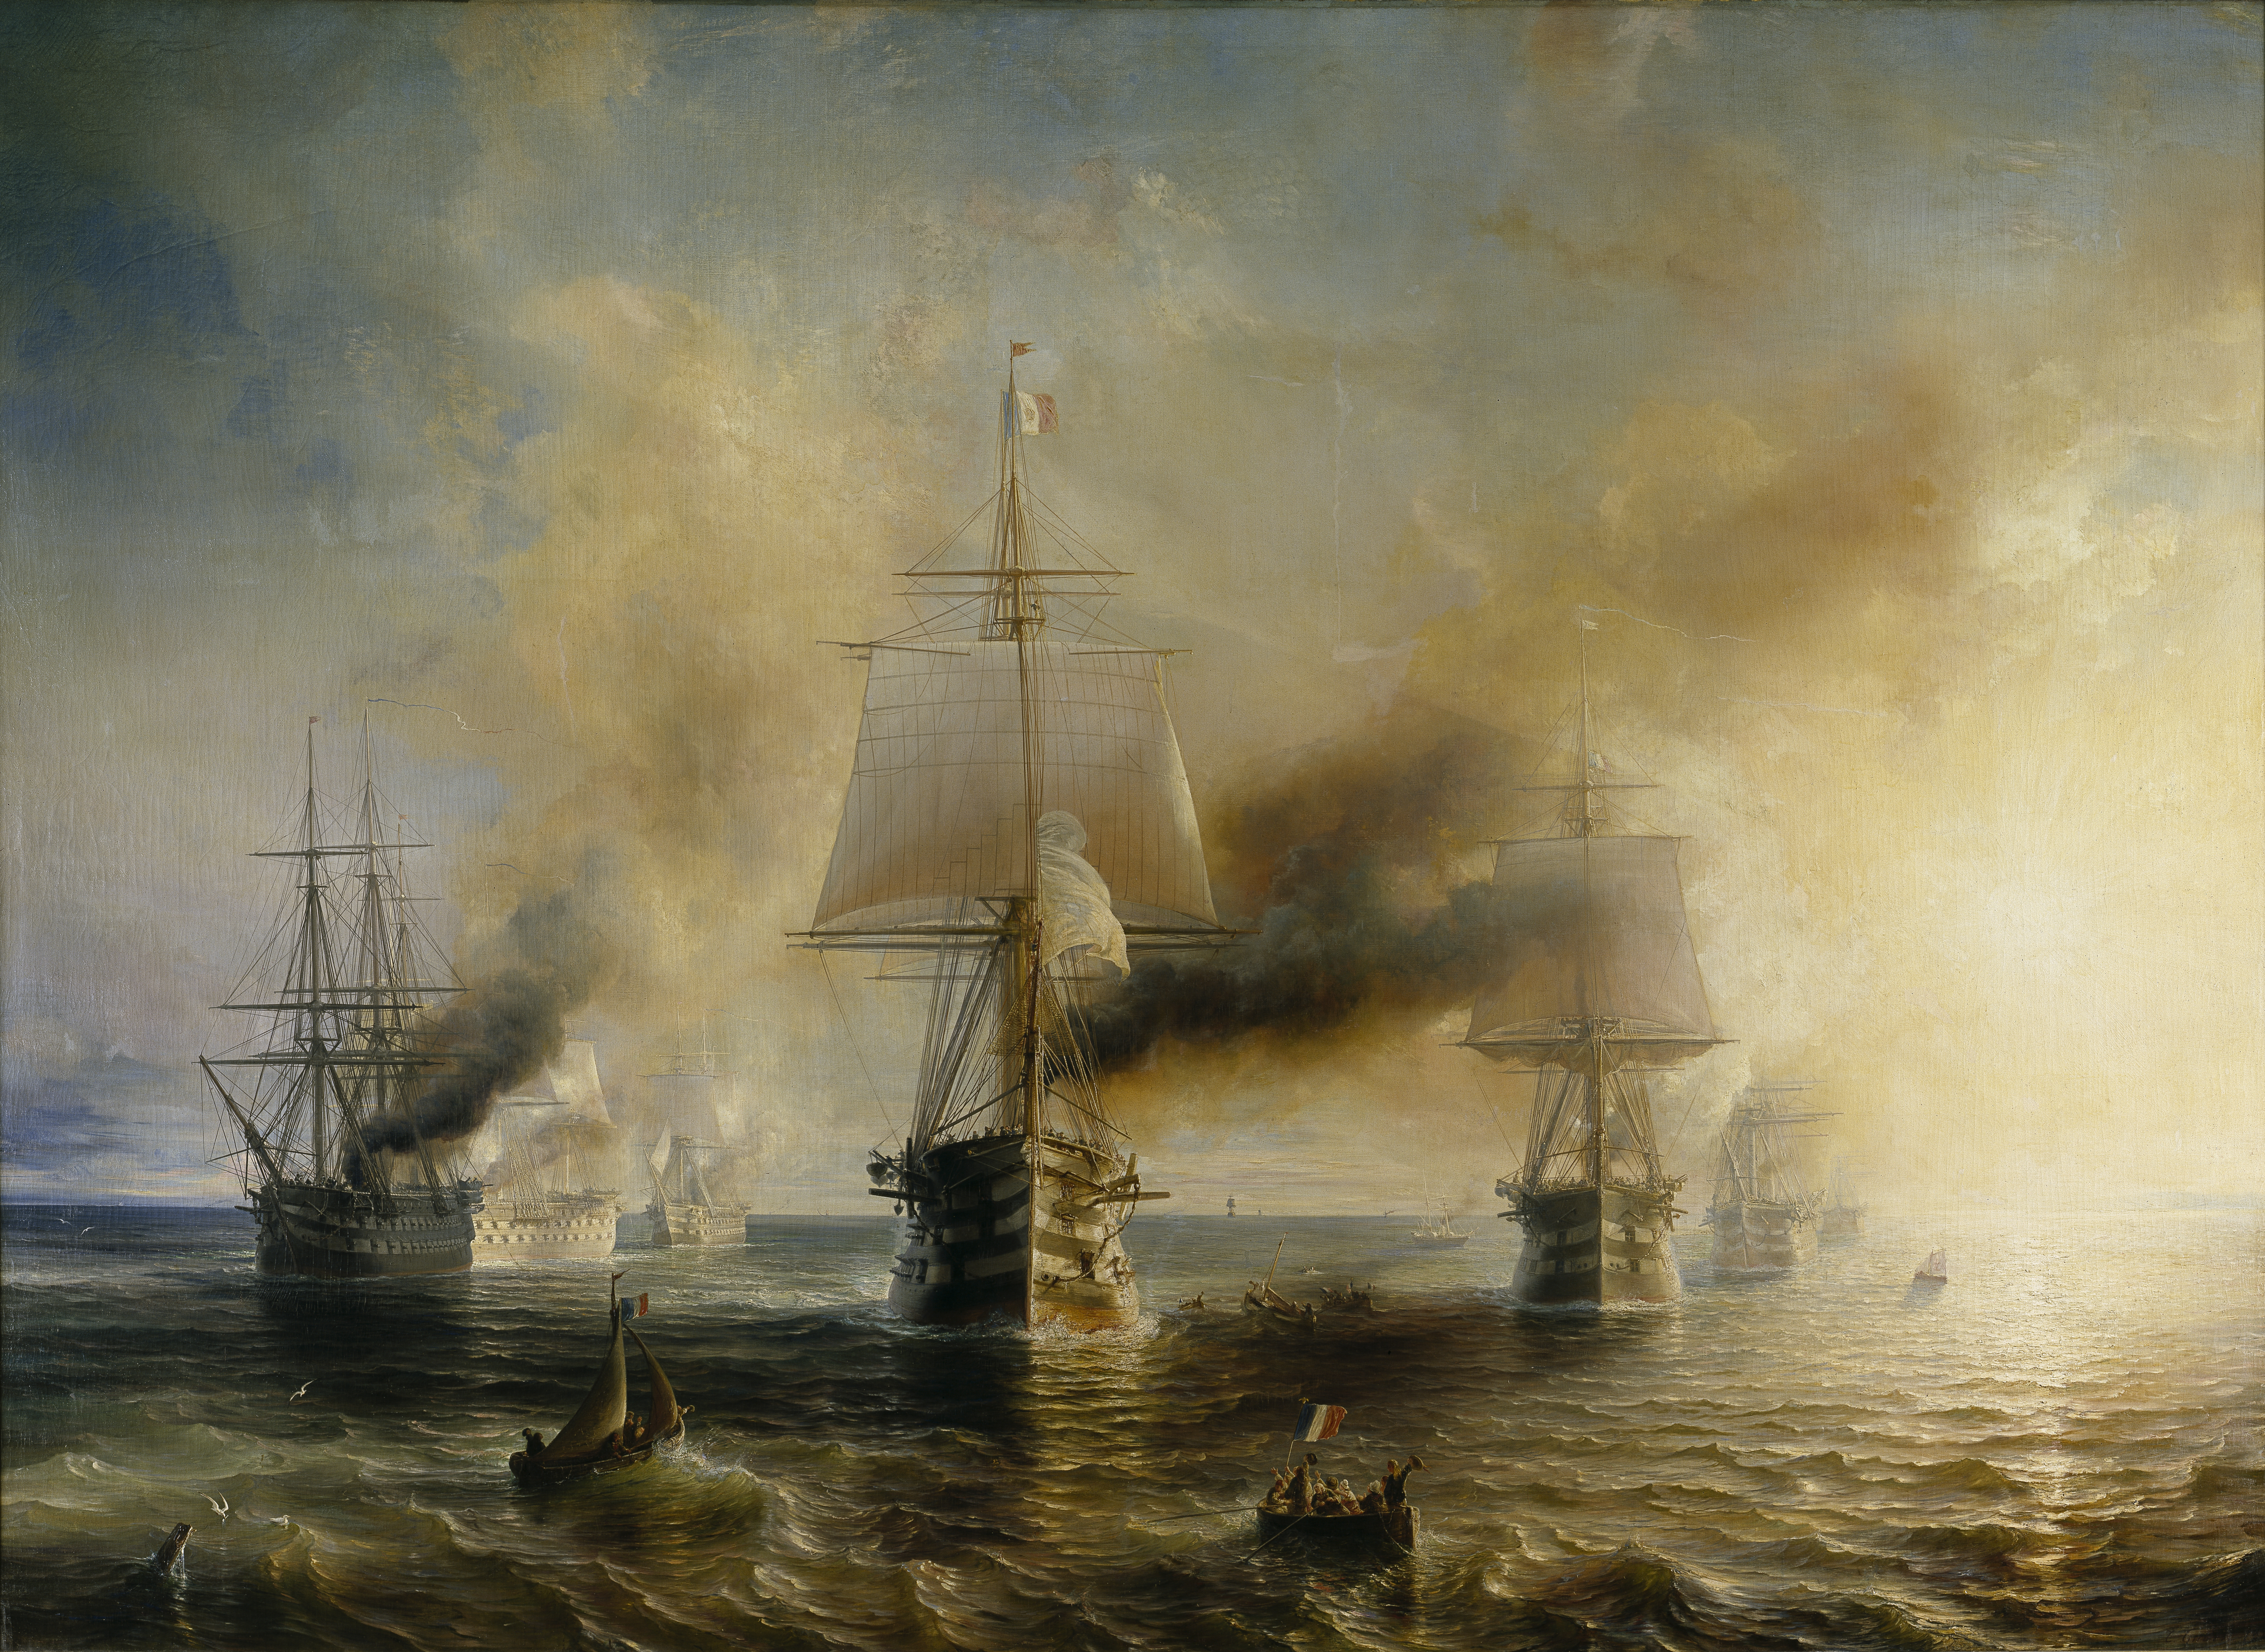 A painting depicting a fleet of French naval vessels. They sail through the ocean and leave dark smoke trails in the air. In the foreground, we can see people on much smaller wooden row boats waving a French flag.